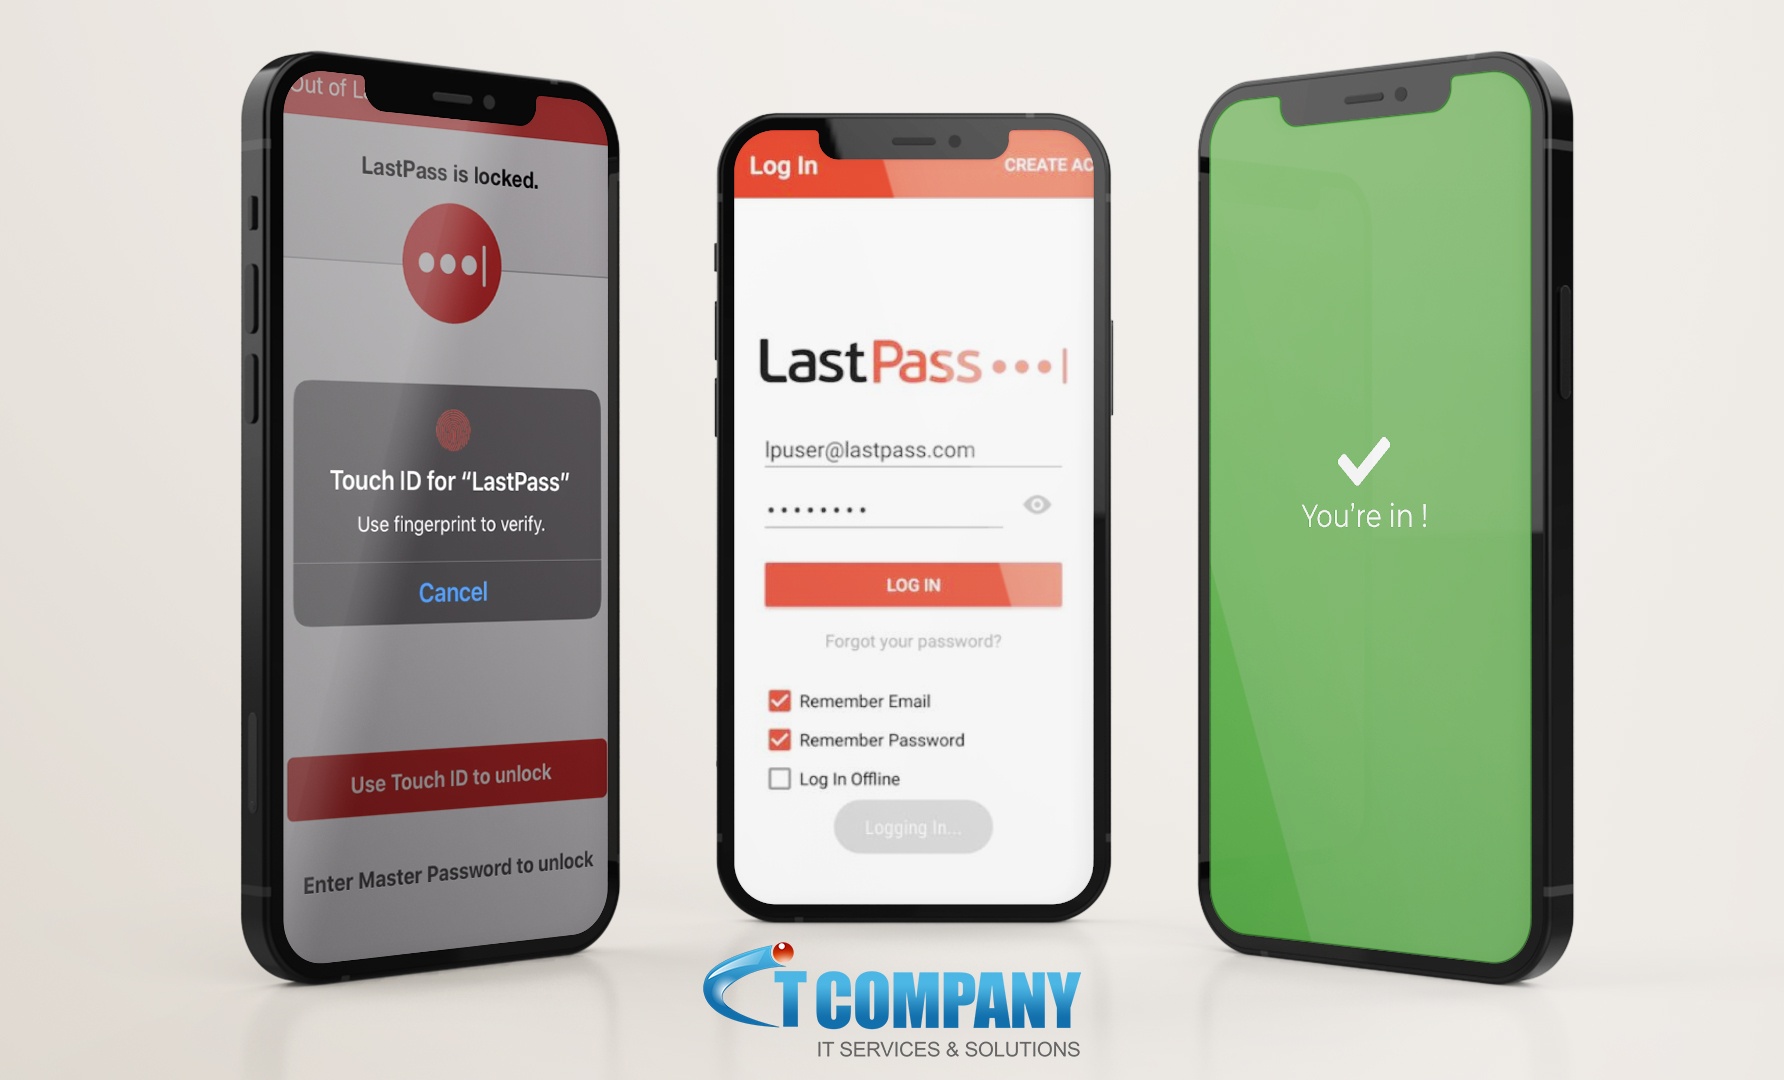 Concerned about your passwords after LastPass was hacked?